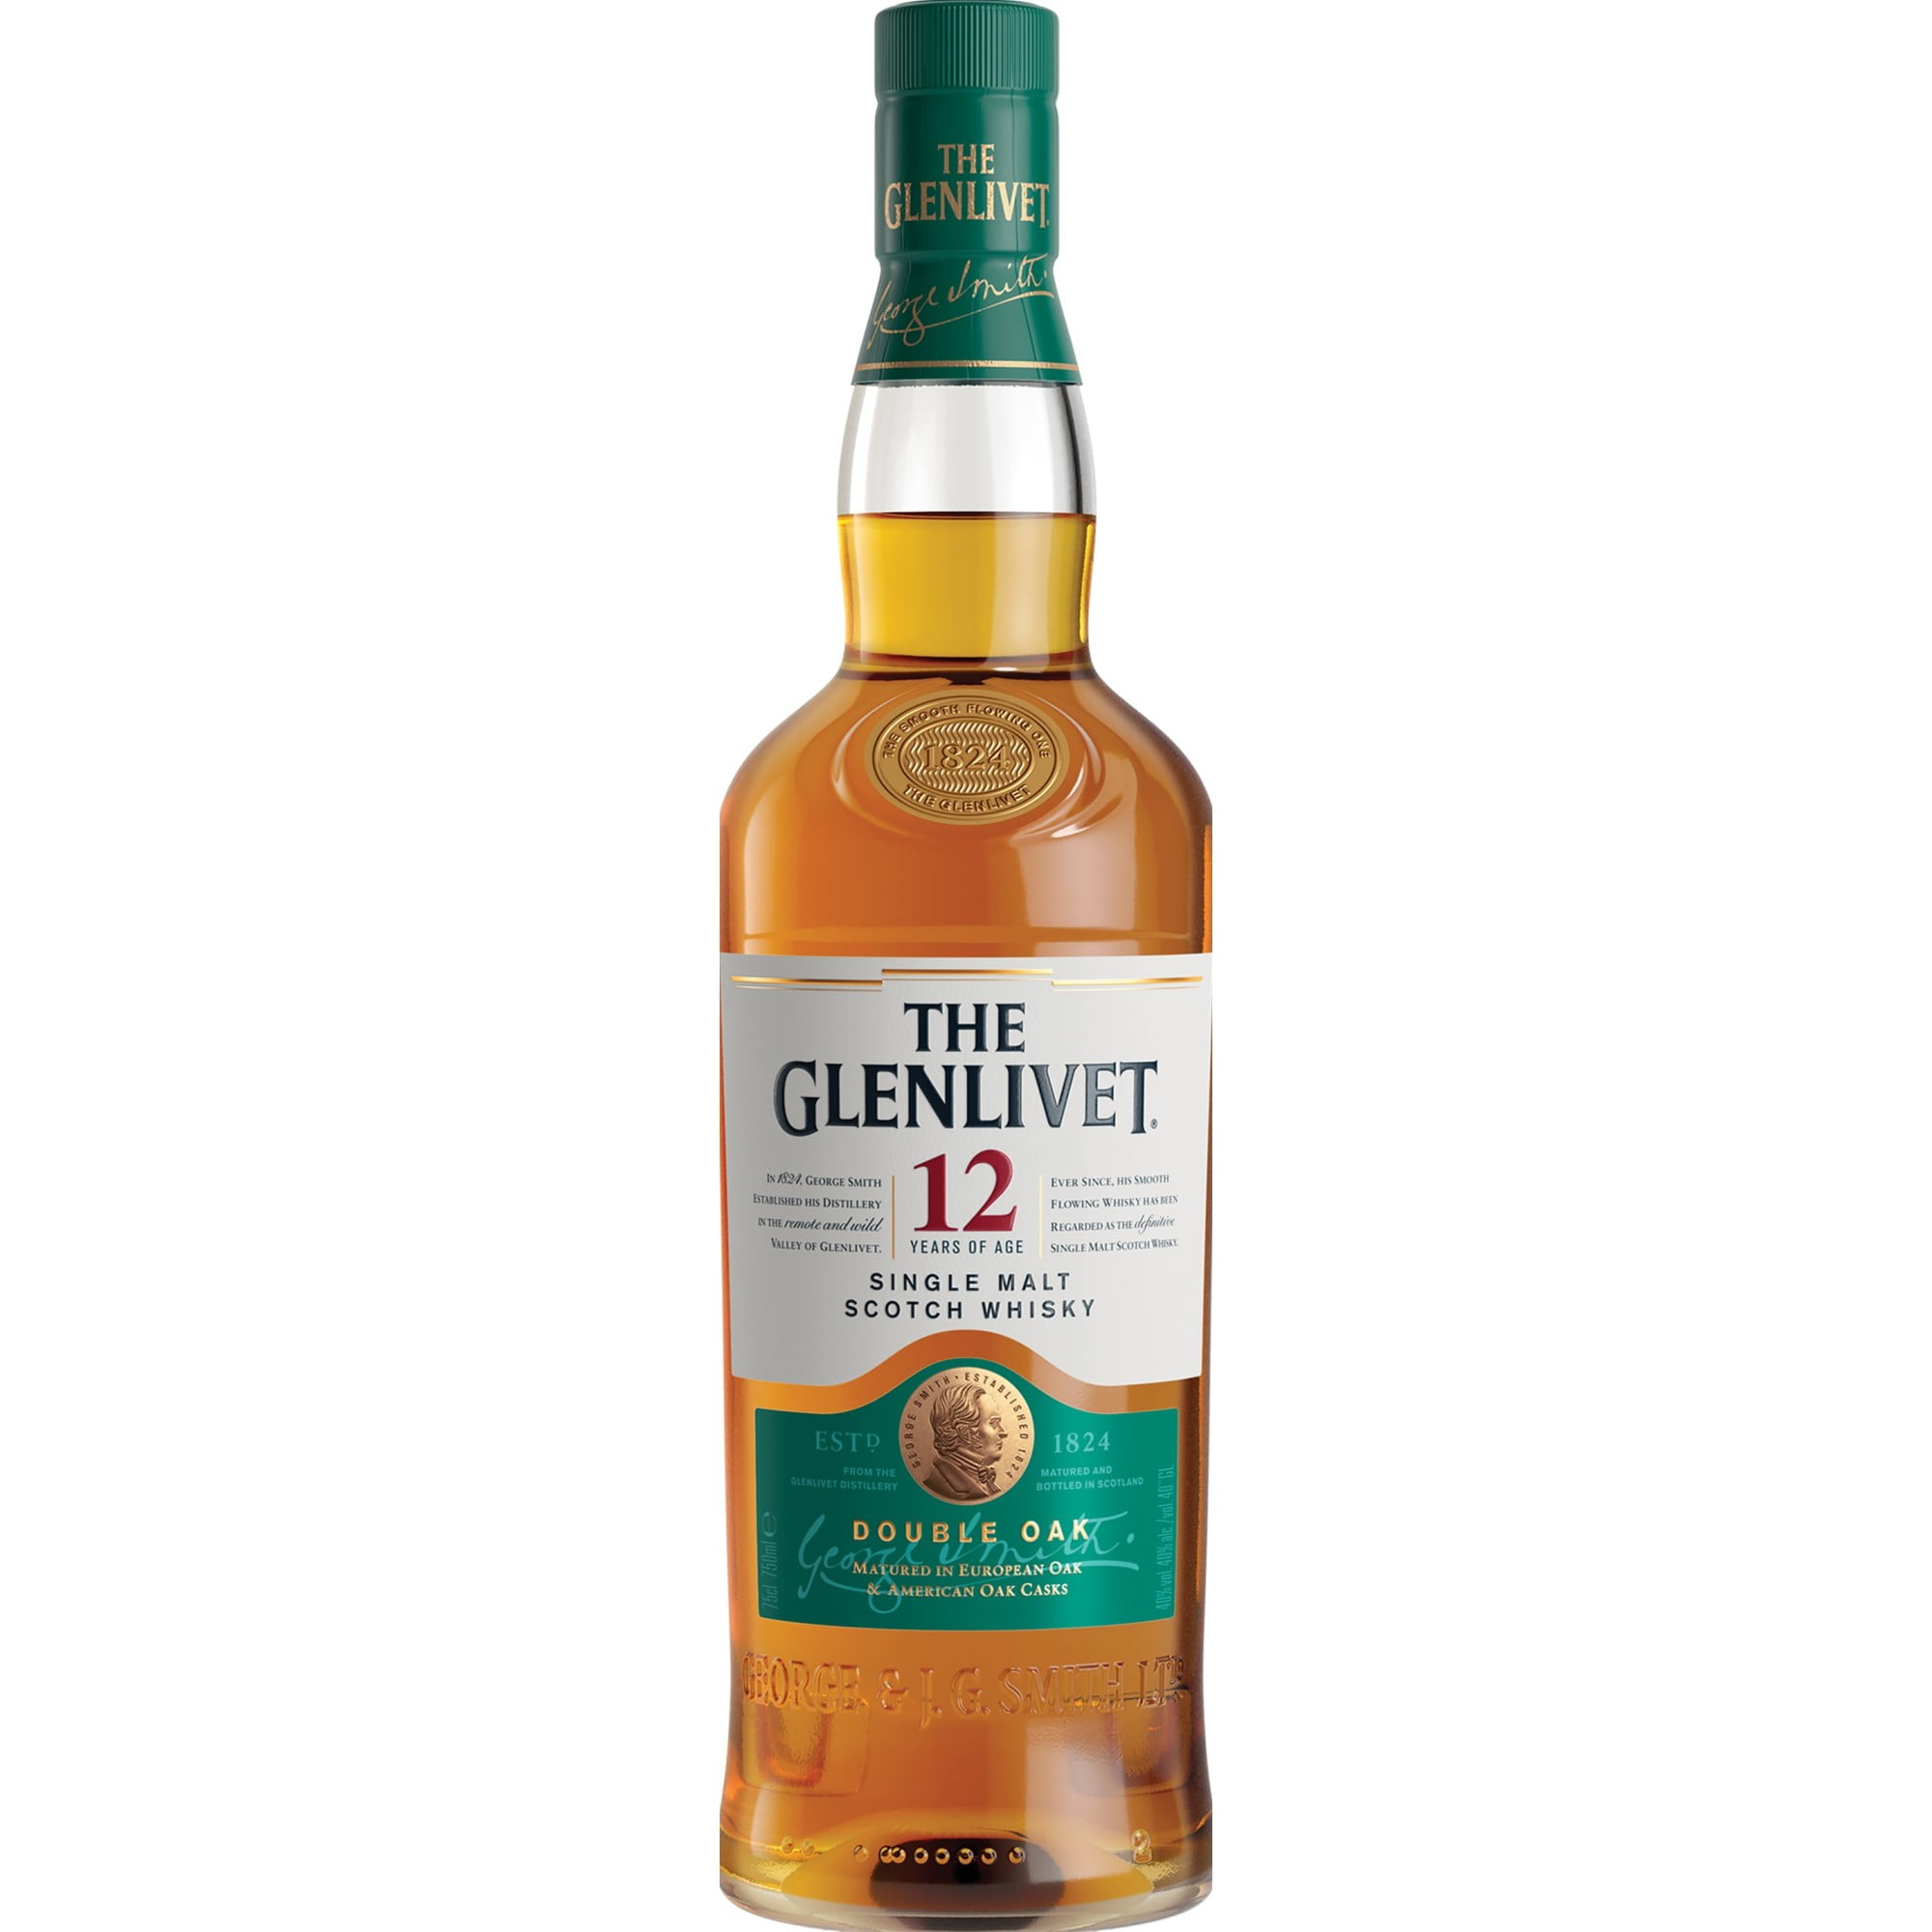 THE GLENLIVET Collectible Whiskey Glass 8 Oz 